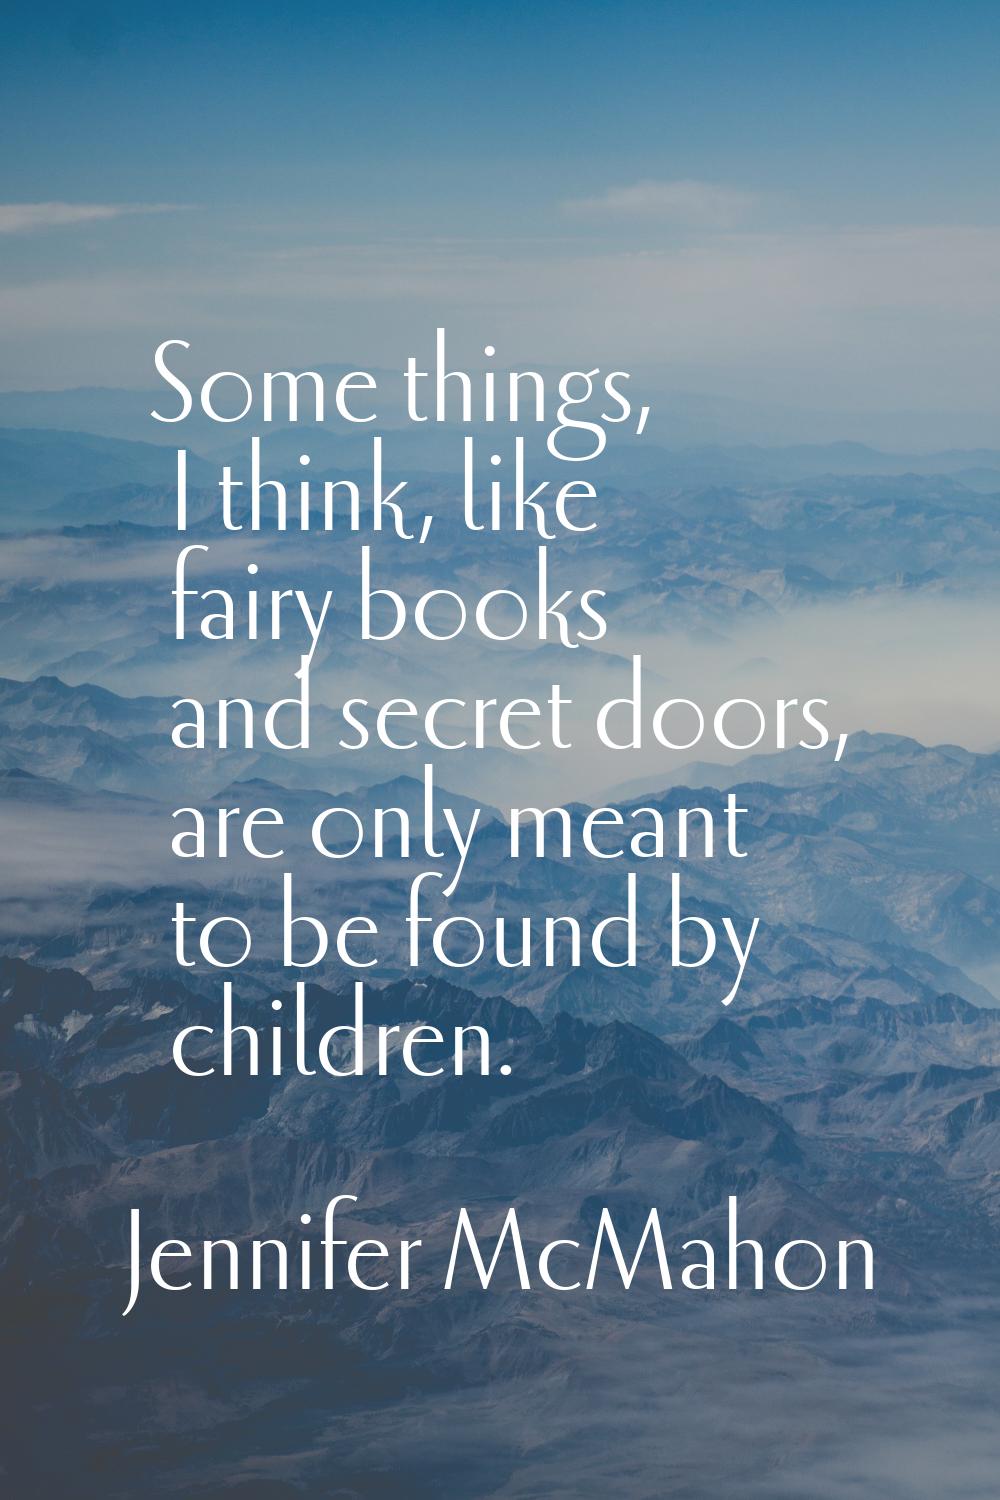 Some things, I think, like fairy books and secret doors, are only meant to be found by children.